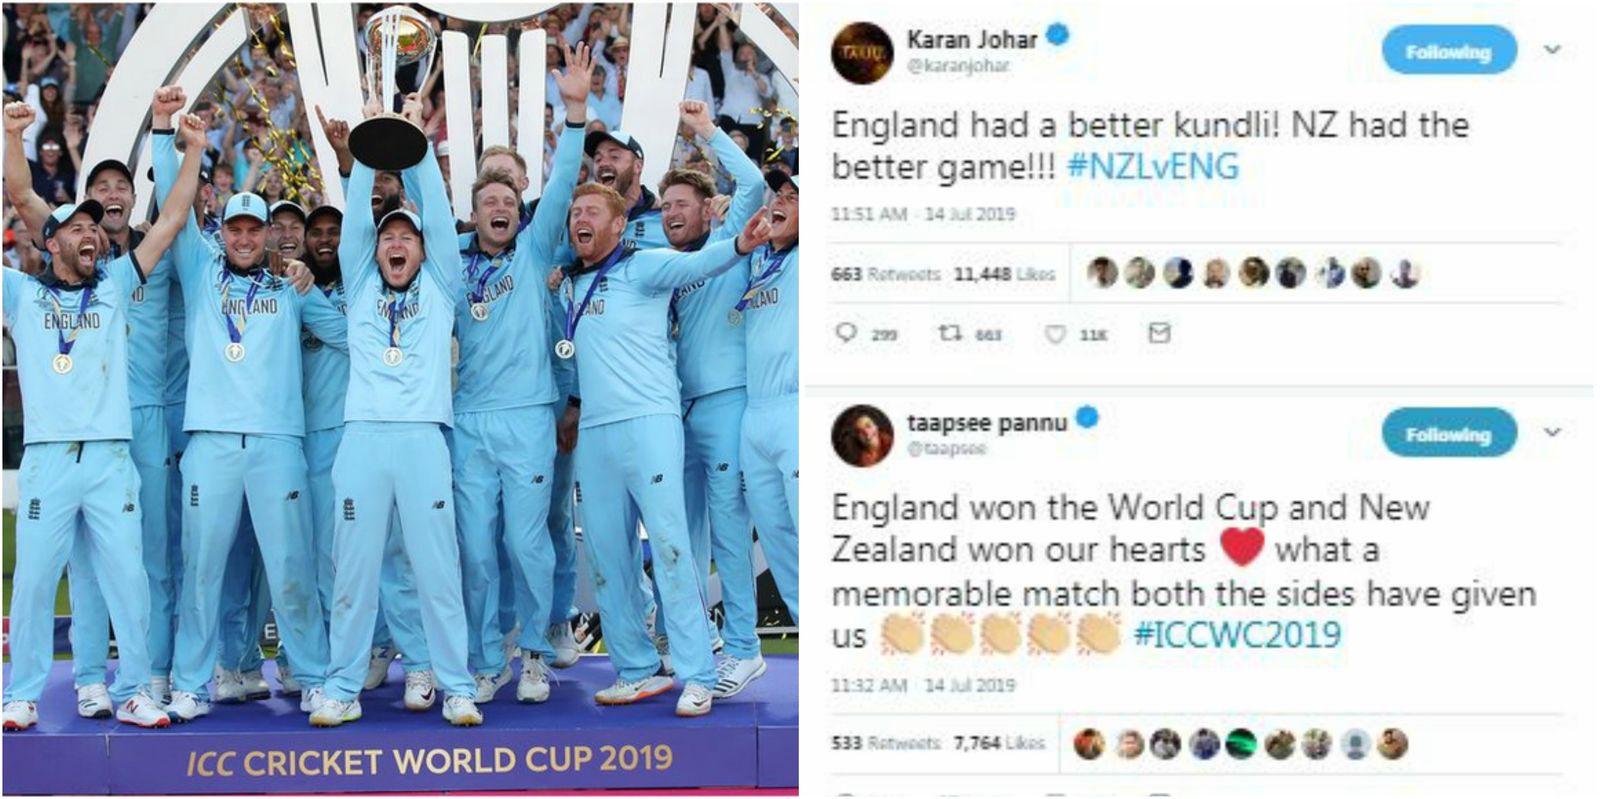 Here's How Bollywood Reacted To England V/S Zealand World Cup Final Match And England's Win